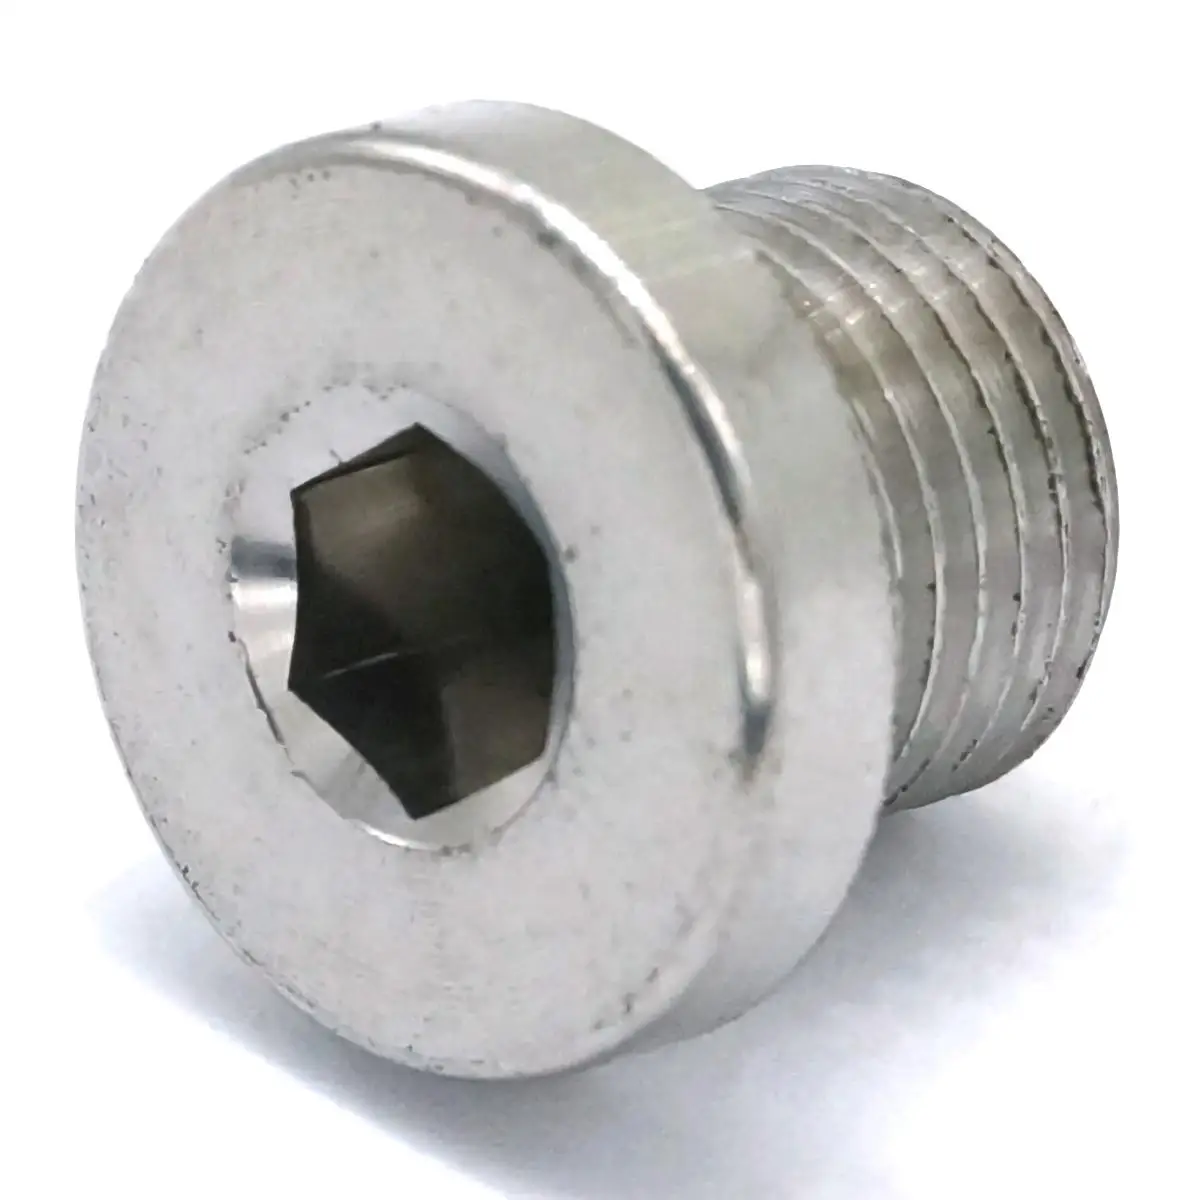 

1/8" BSP Male 304 Stainless Steel Countersunk End Plug With Flange Internal Hex Head Socket Pipe Fitting 357 PSI